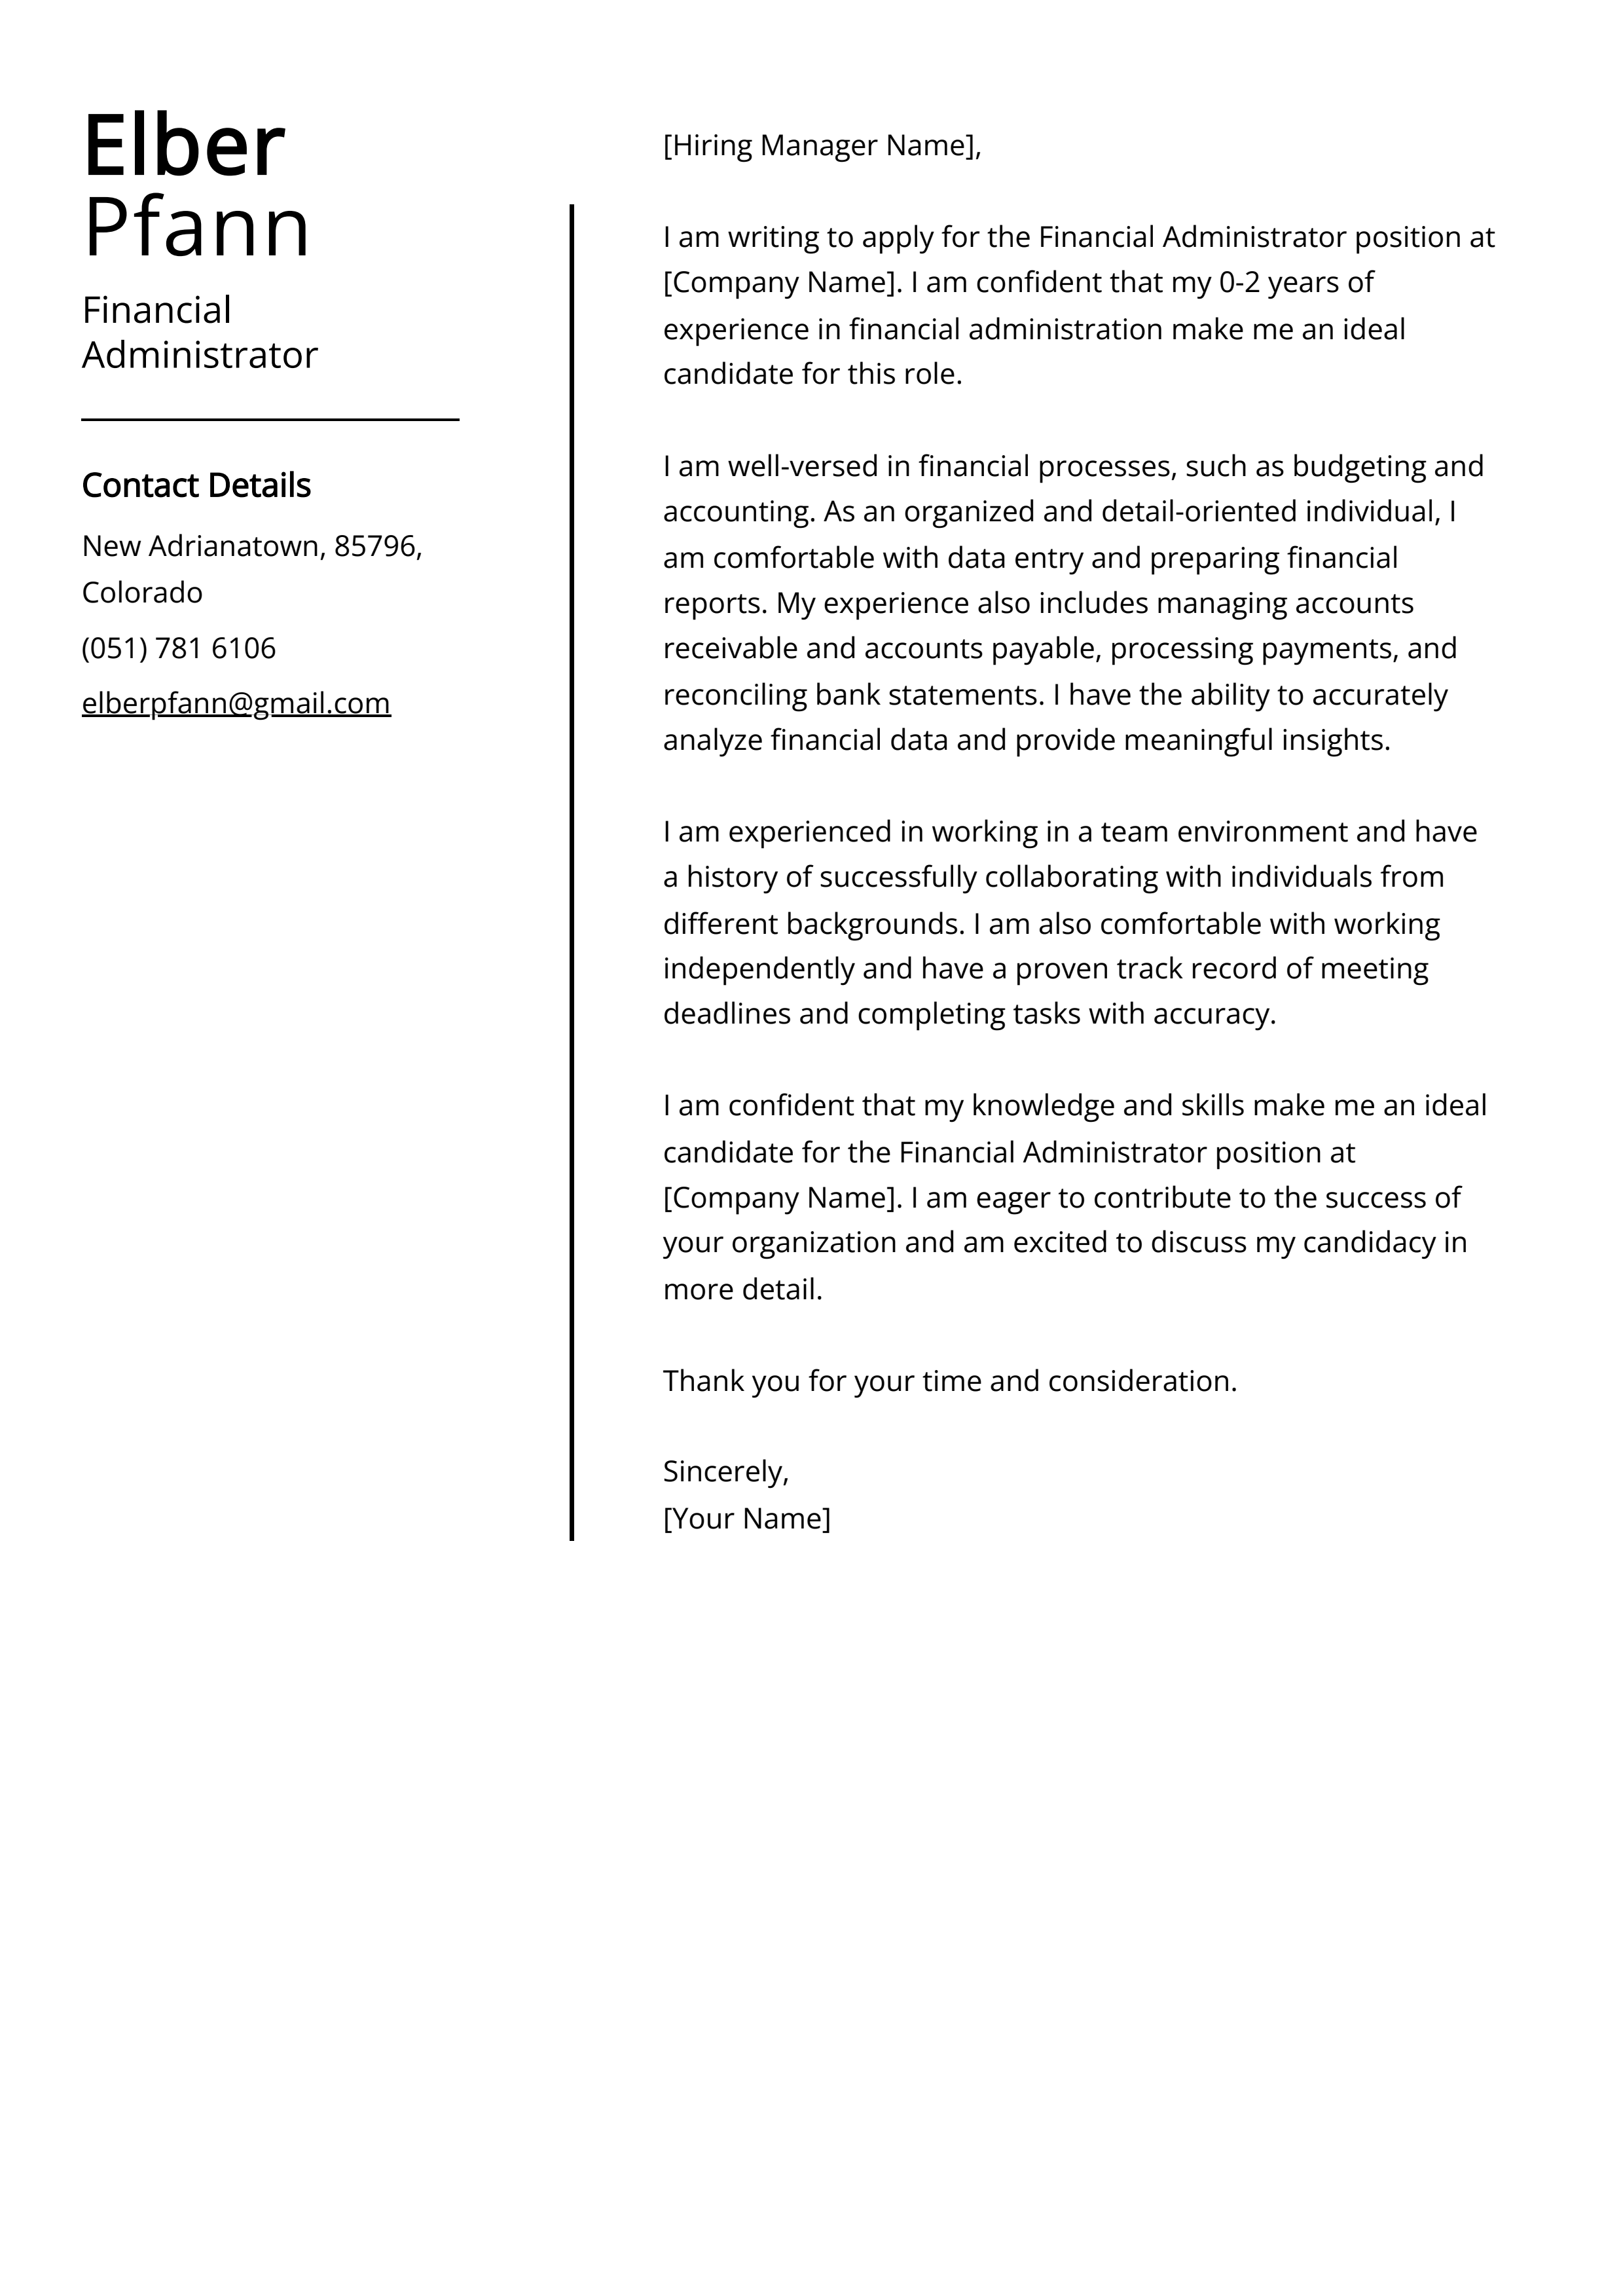 Financial Administrator Cover Letter Example